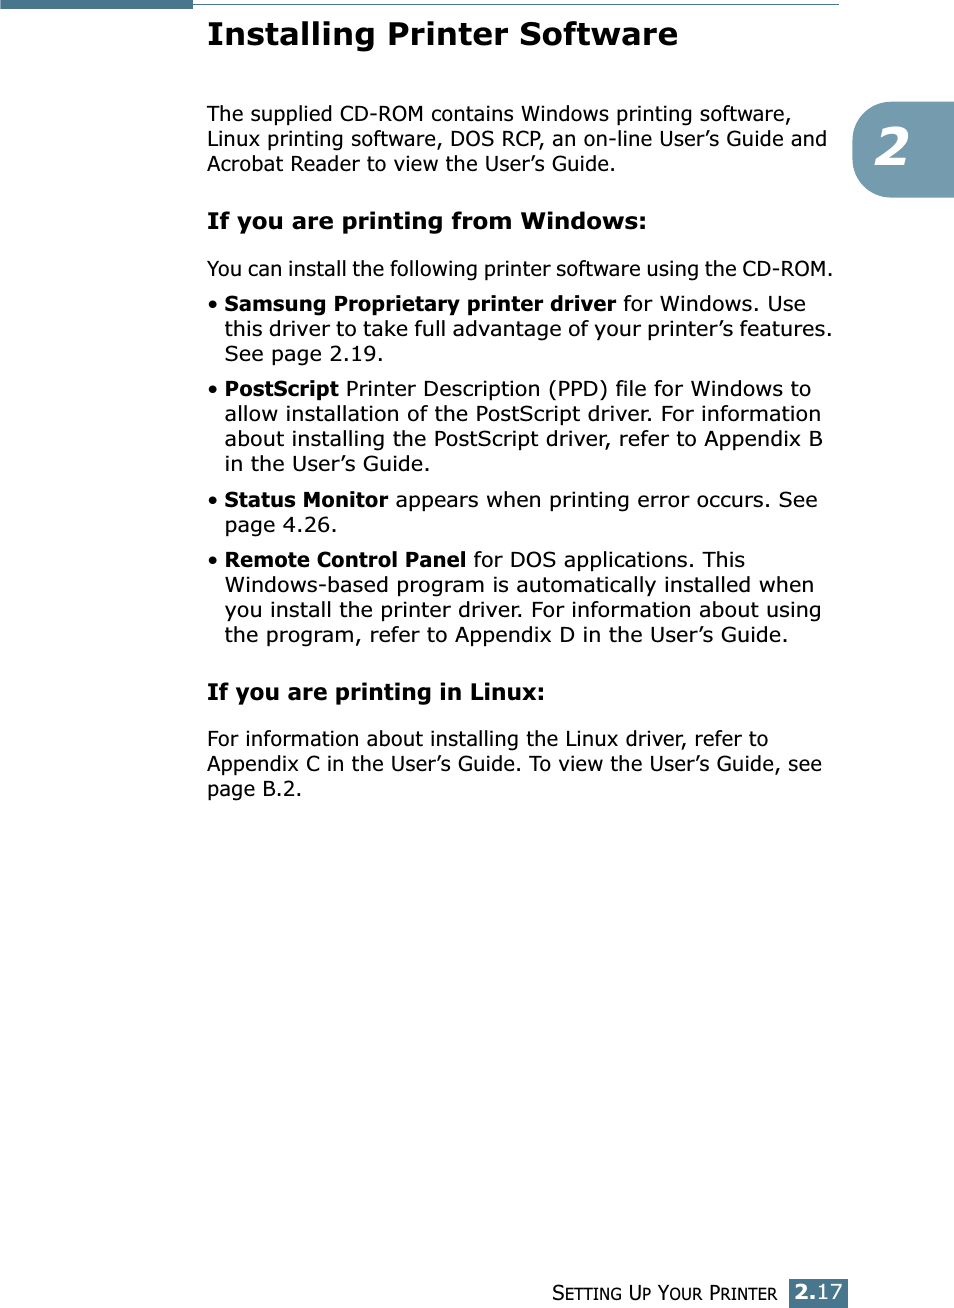 SETTING UP YOUR PRINTER2.172Installing Printer SoftwareThe supplied CD-ROM contains Windows printing software, Linux printing software, DOS RCP, an on-line User’s Guide and Acrobat Reader to view the User’s Guide. If you are printing from Windows:You can install the following printer software using the CD-ROM. •Samsung Proprietary printer driver for Windows. Use this driver to take full advantage of your printer’s features. See page 2.19.•PostScript Printer Description (PPD) file for Windows to allow installation of the PostScript driver. For information about installing the PostScript driver, refer to Appendix B in the User’s Guide.•Status Monitor appears when printing error occurs. See page 4.26.•Remote Control Panel for DOS applications. This Windows-based program is automatically installed when you install the printer driver. For information about using the program, refer to Appendix D in the User’s Guide.If you are printing in Linux:For information about installing the Linux driver, refer to Appendix C in the User’s Guide. To view the User’s Guide, see page B.2.